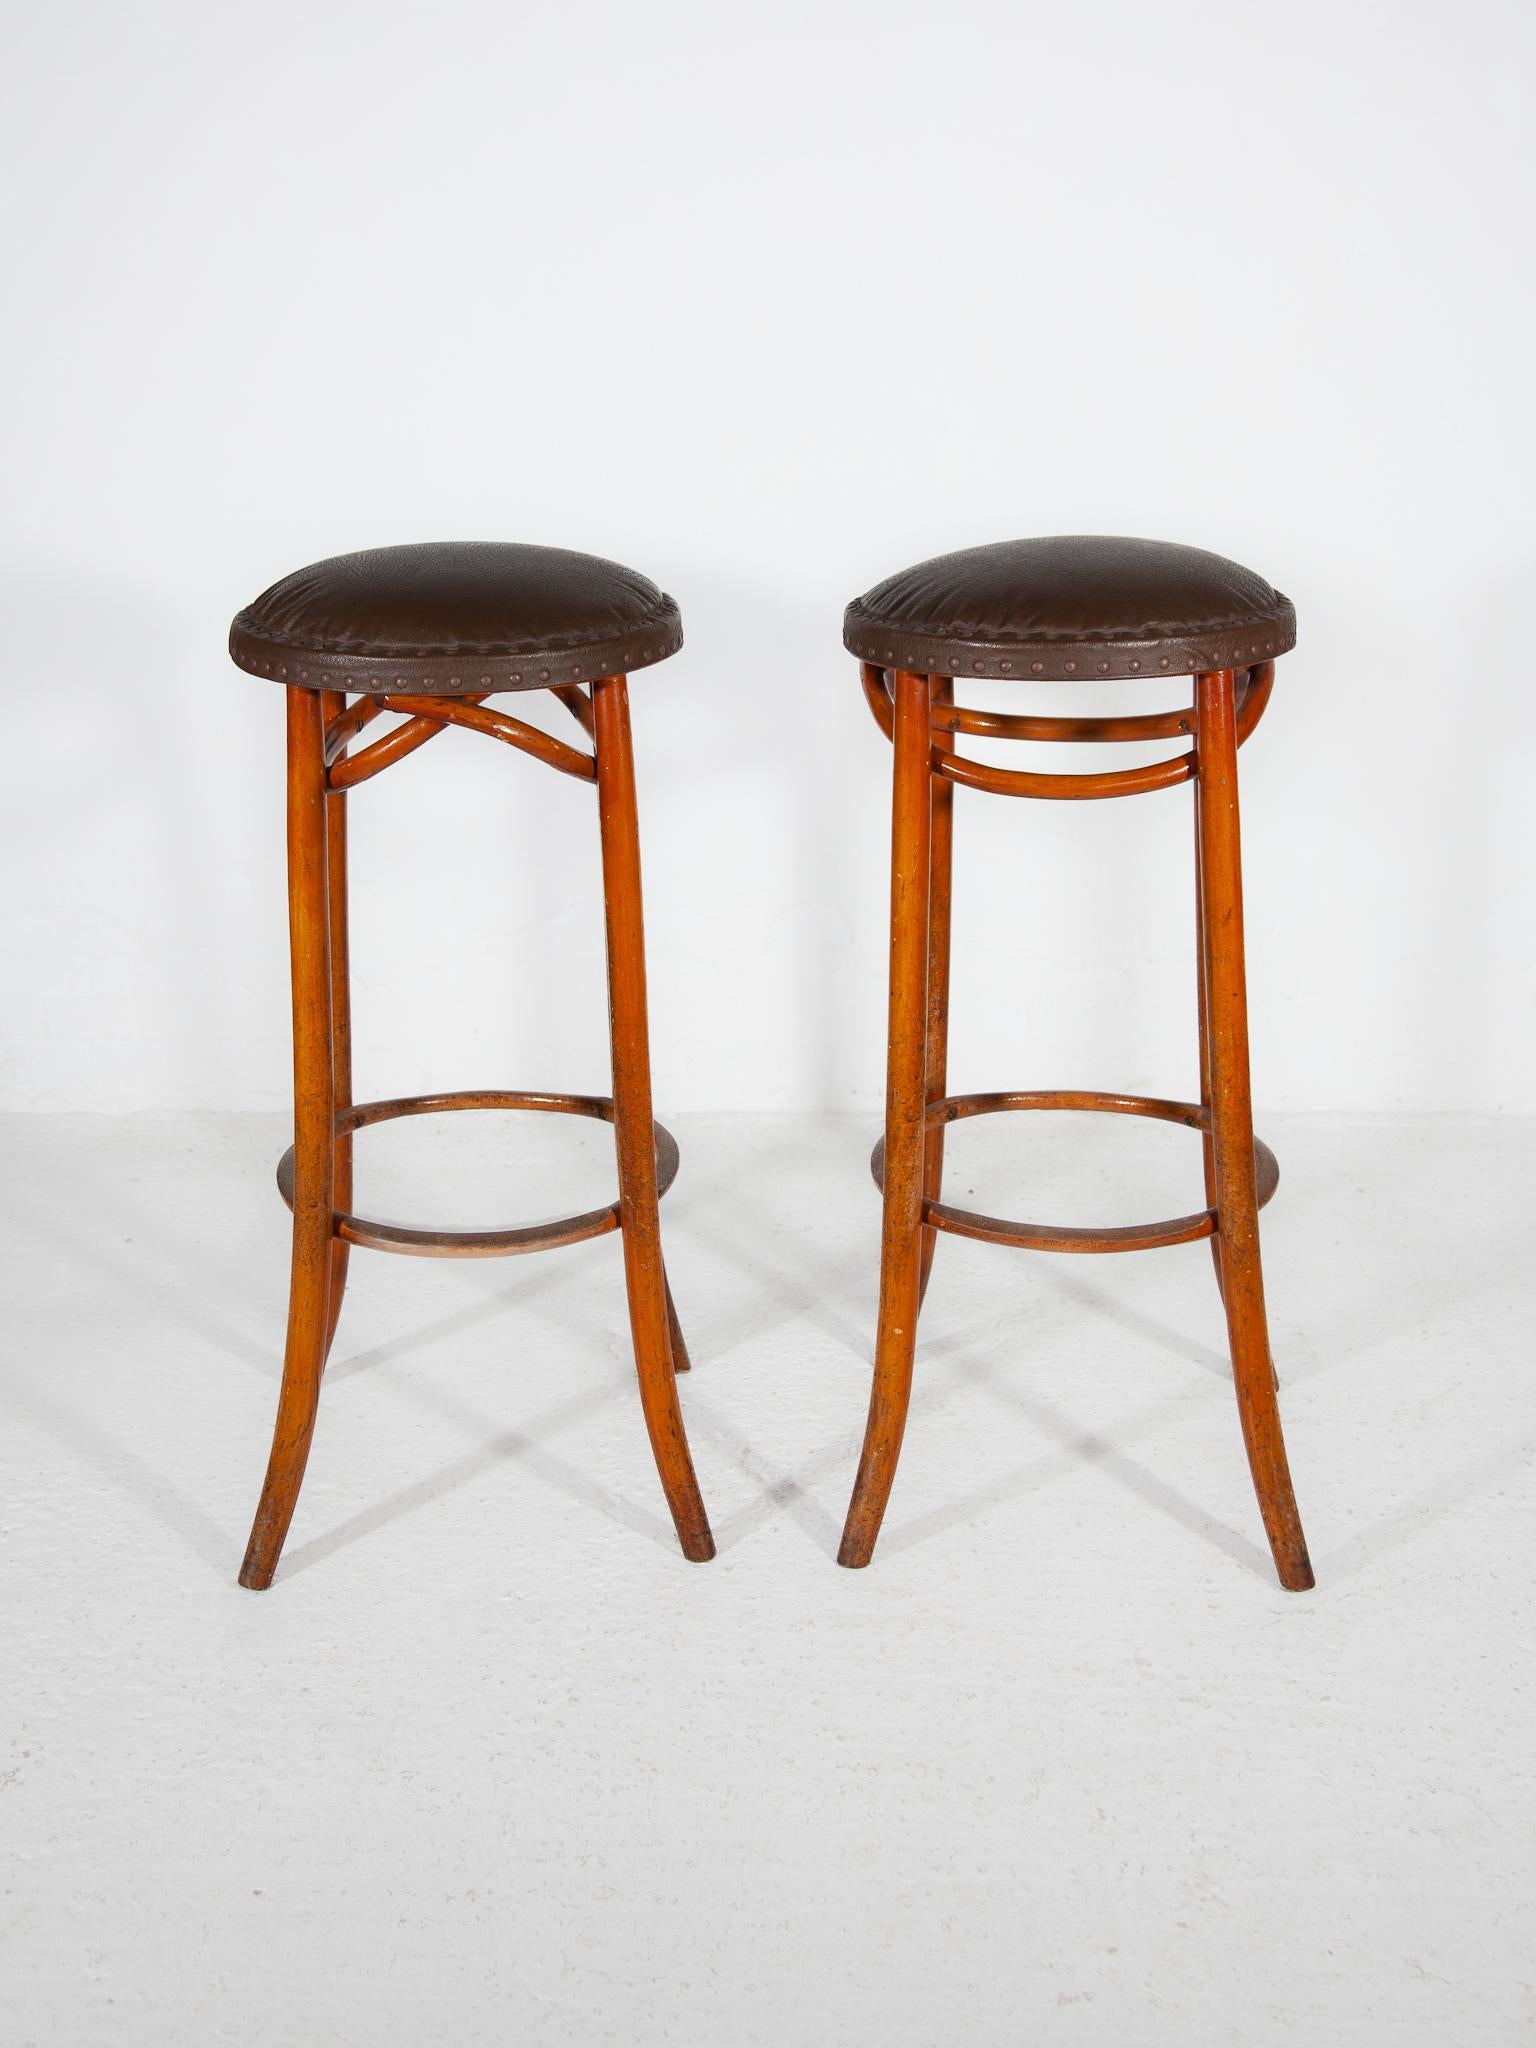 Austrian Set of Two Thonet Bentwood Cafe Bar Stools and Padded Leather Seat.